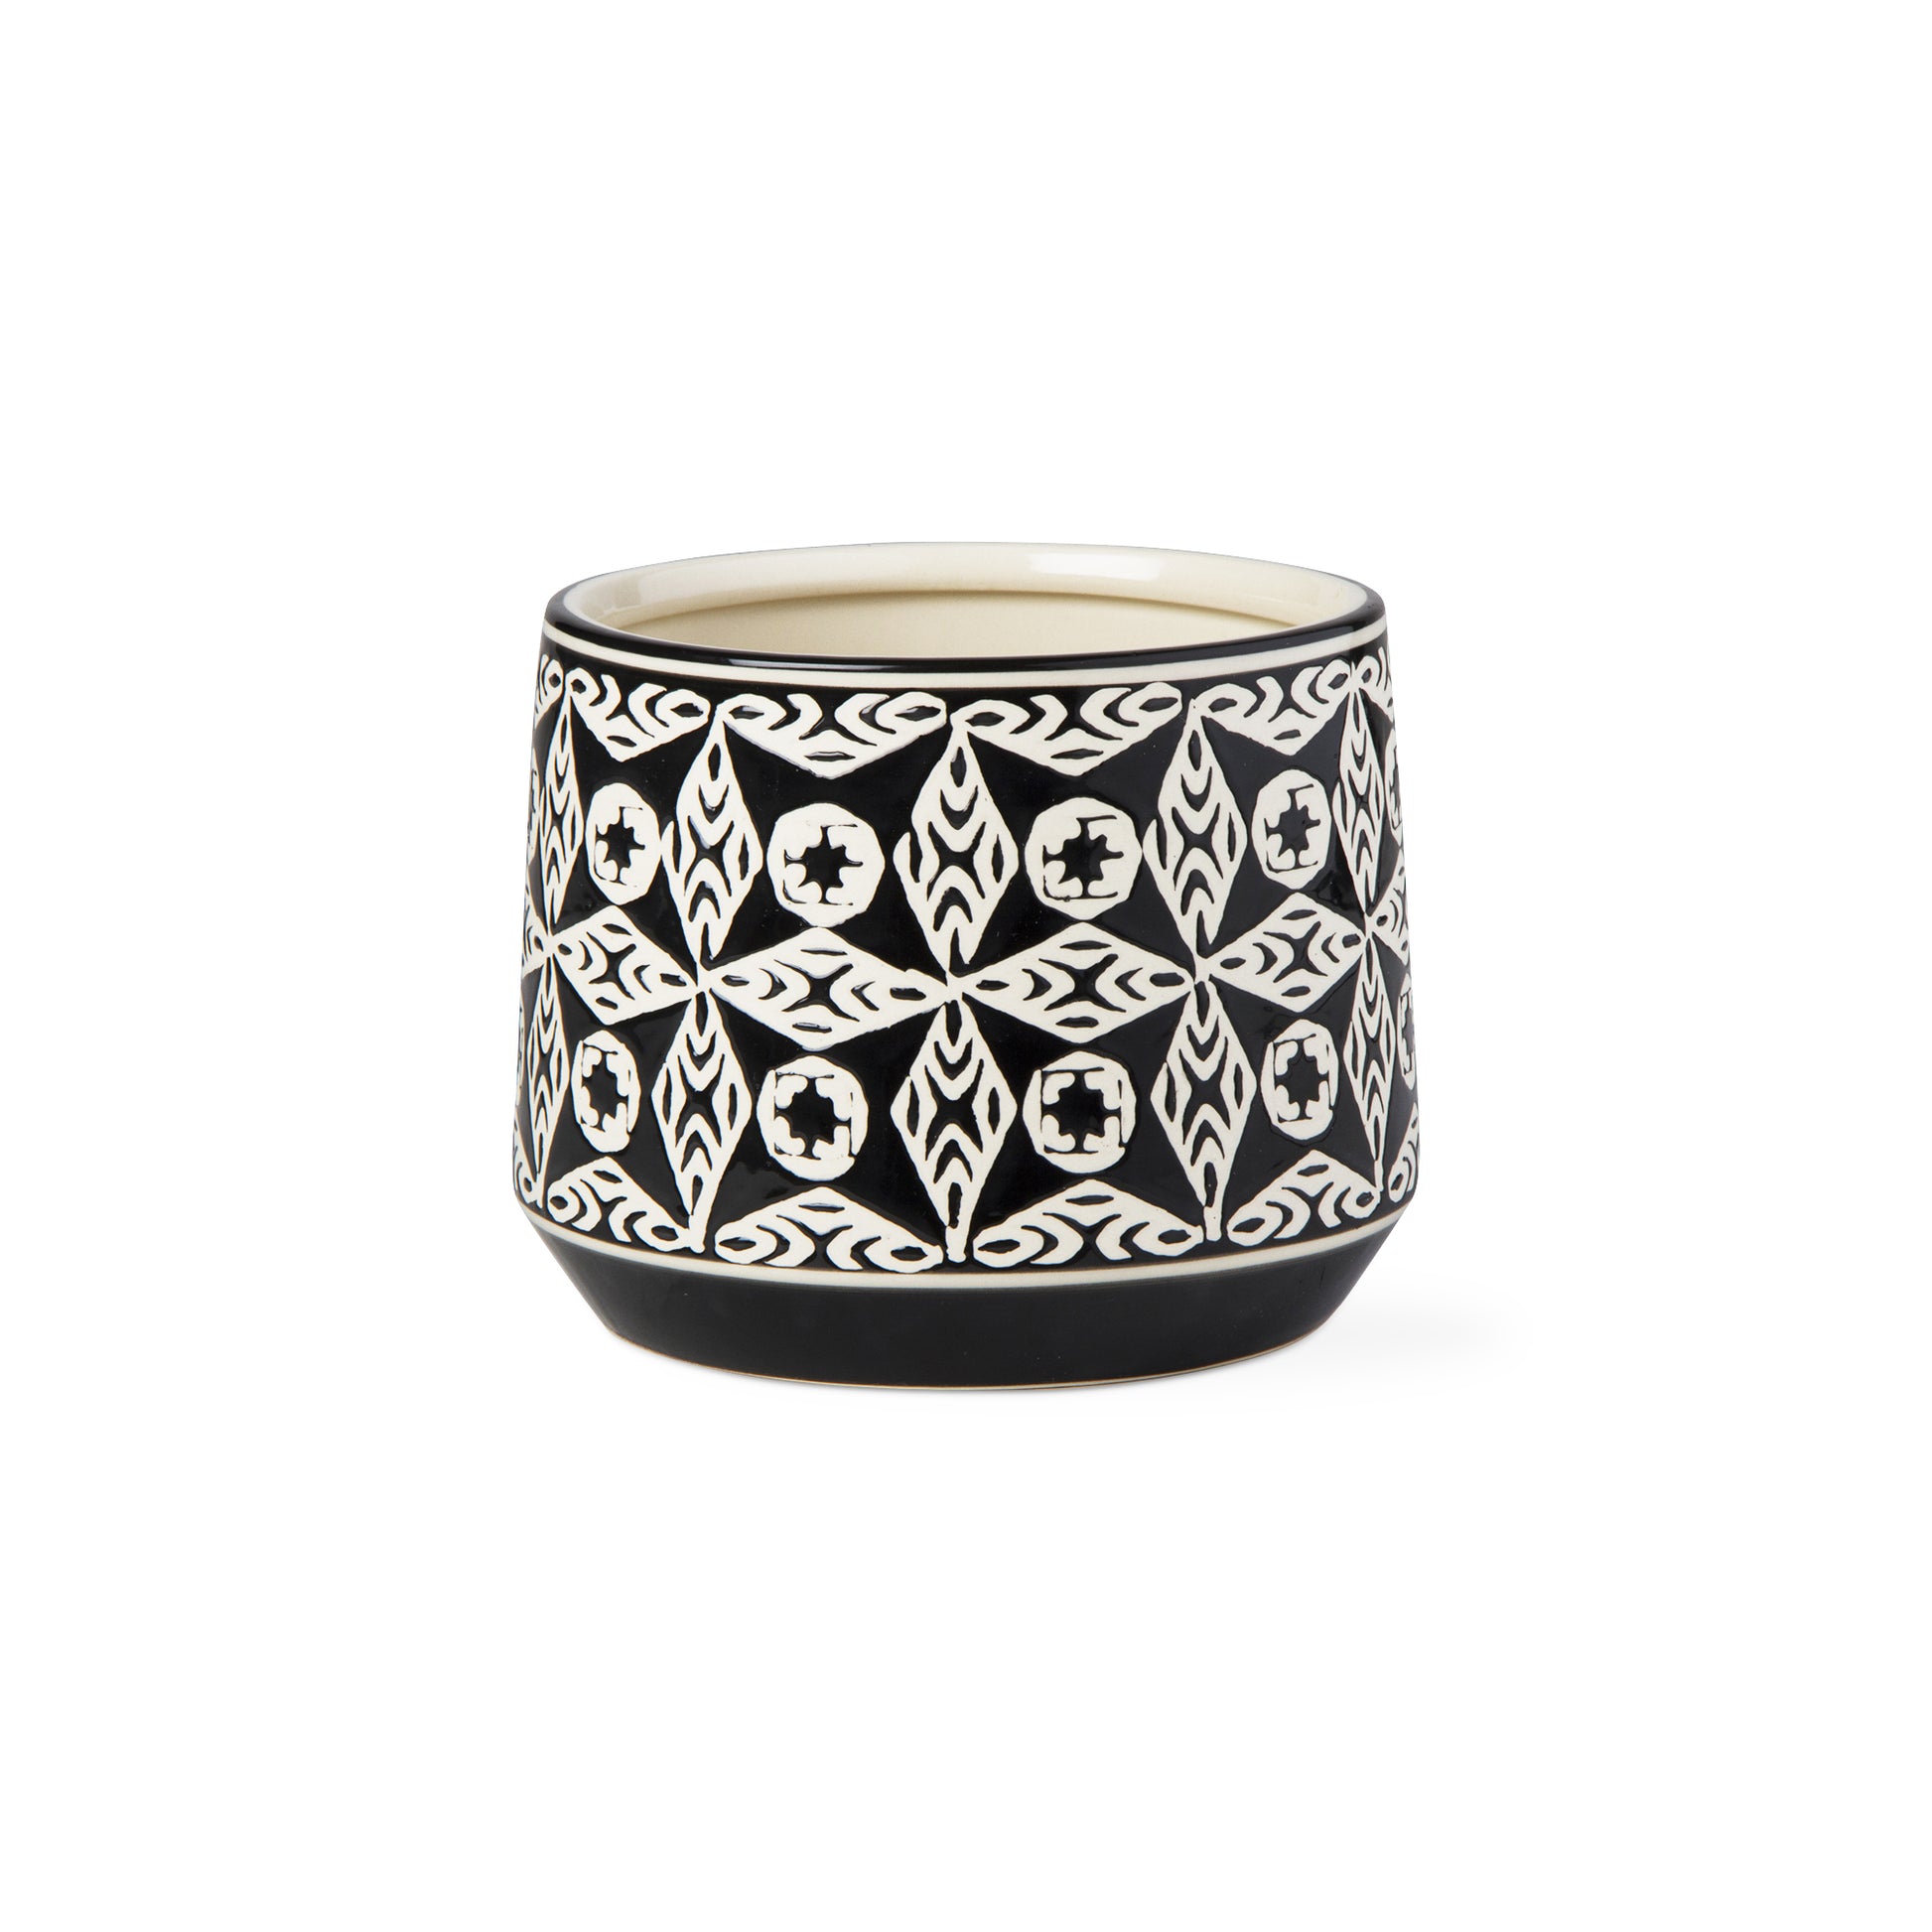 black and white planter with geometric design on white background.